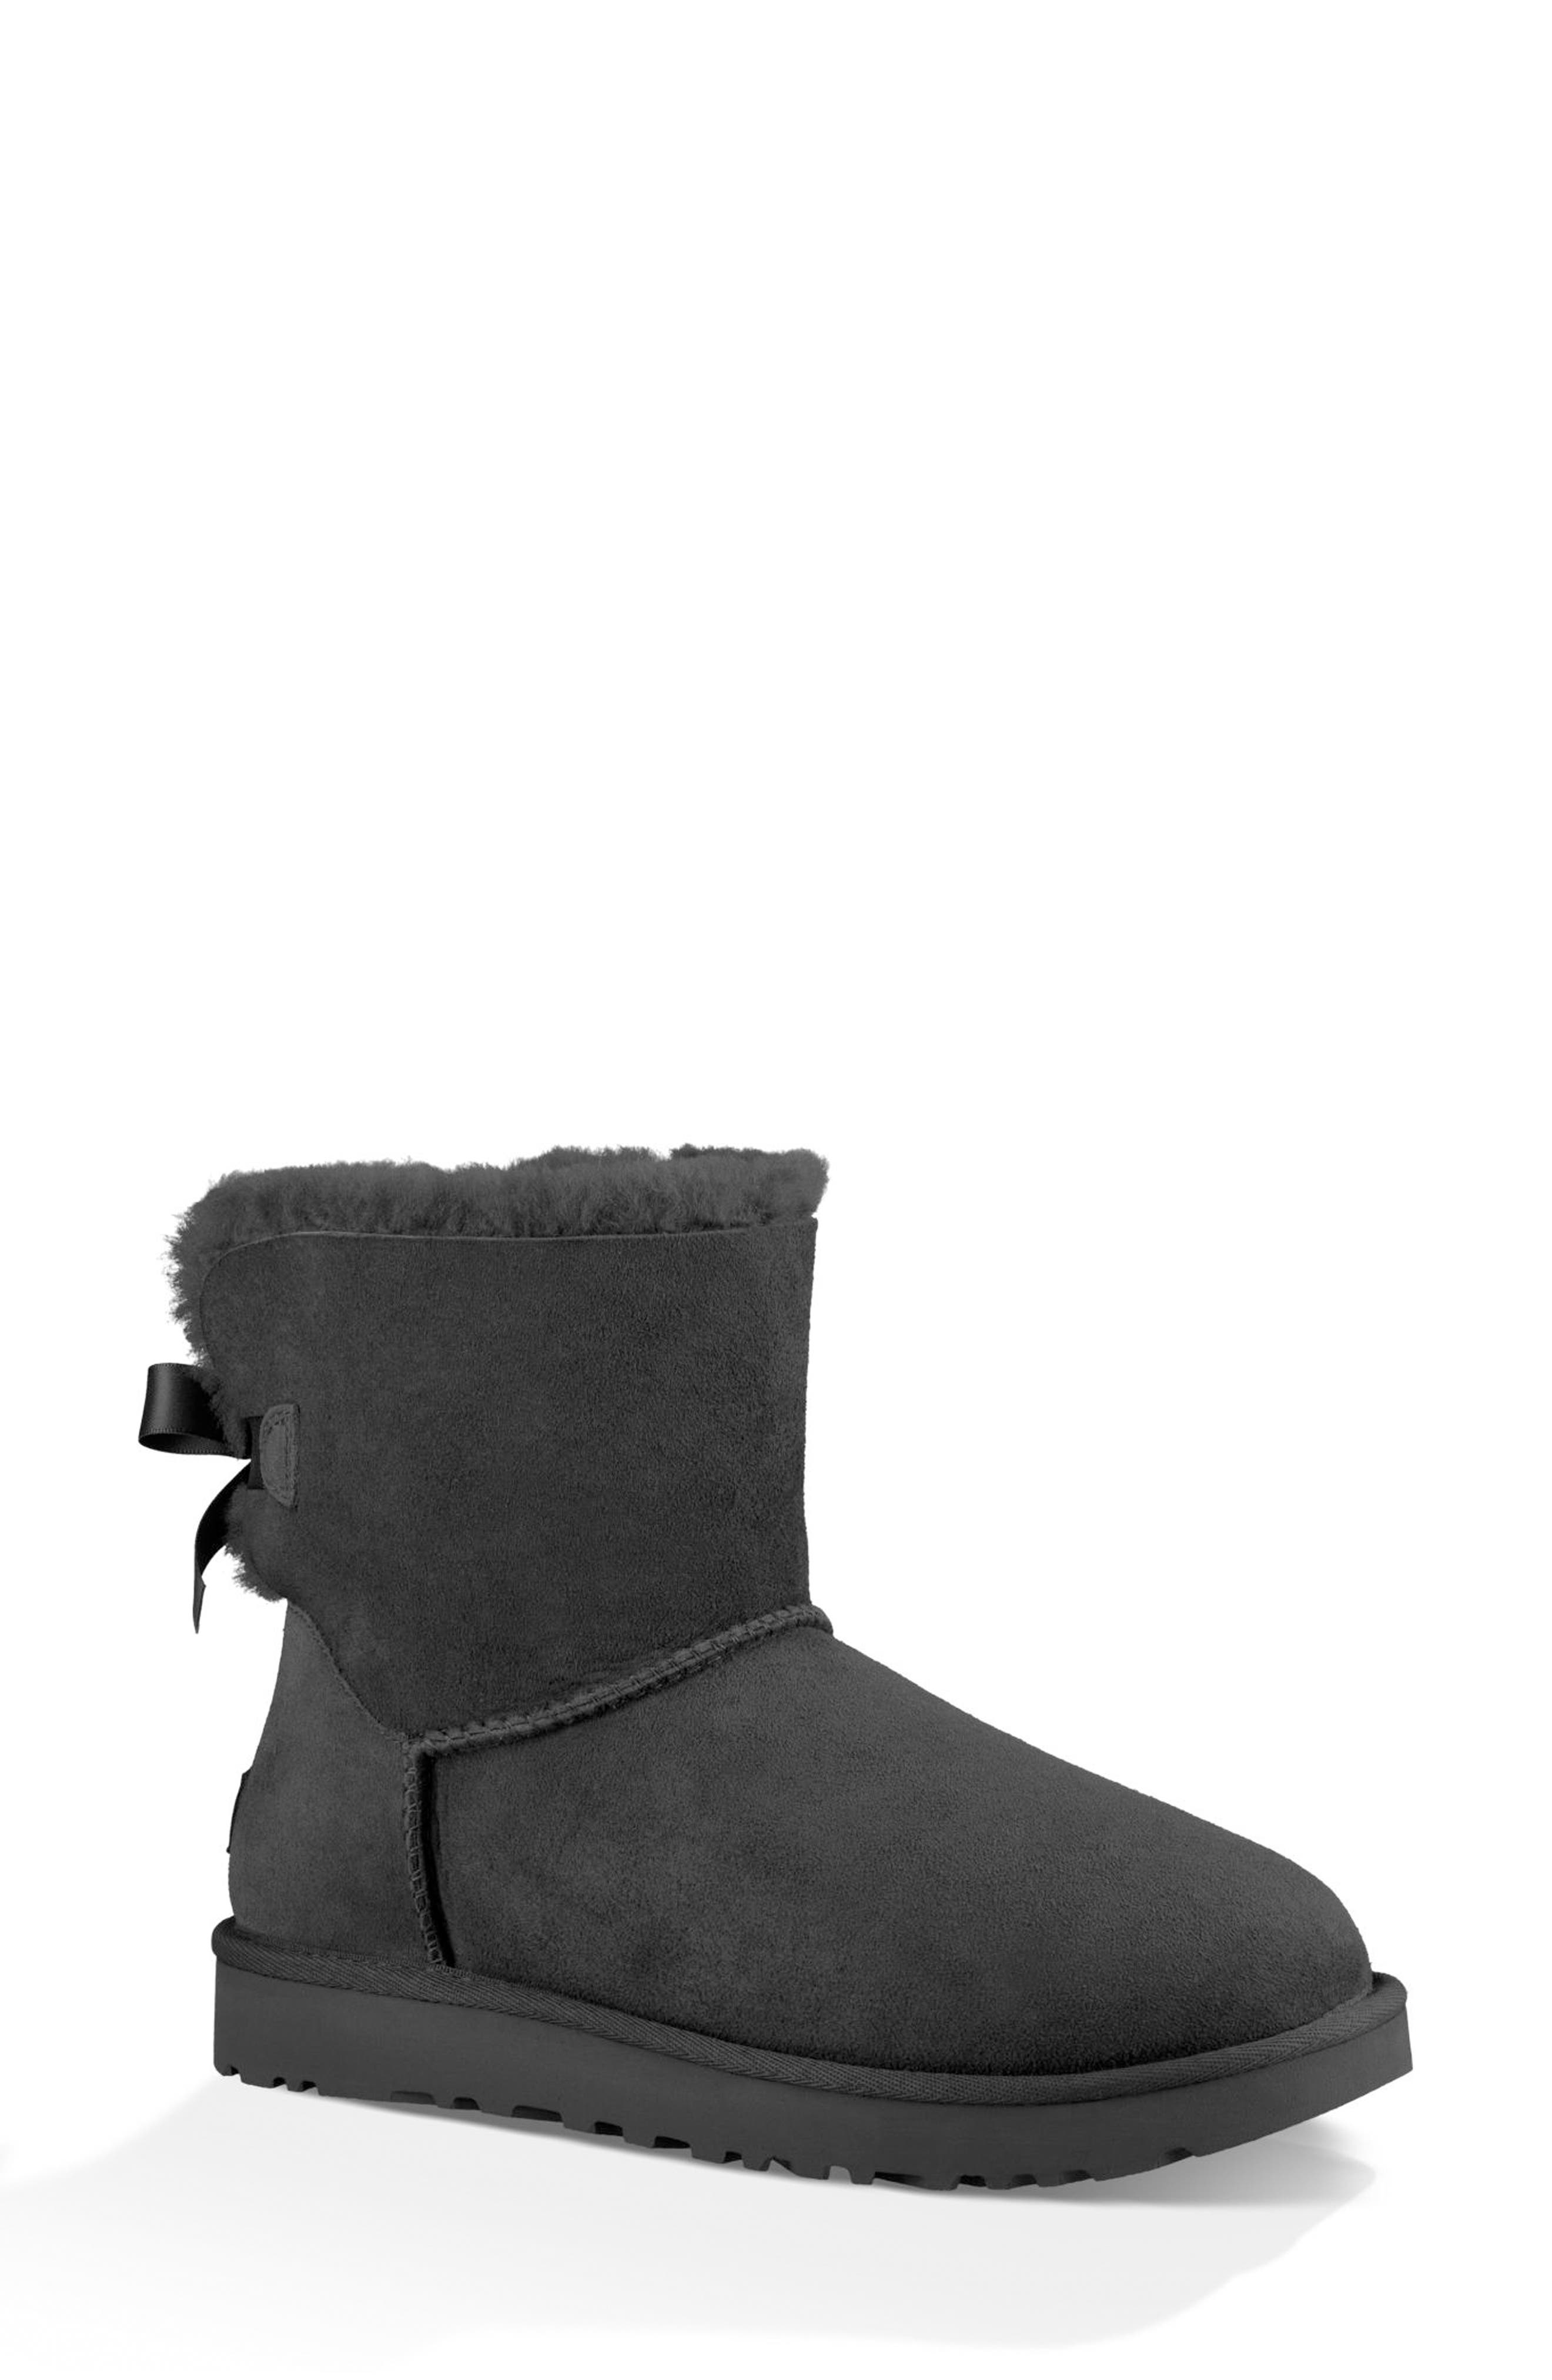 uggs for under $100